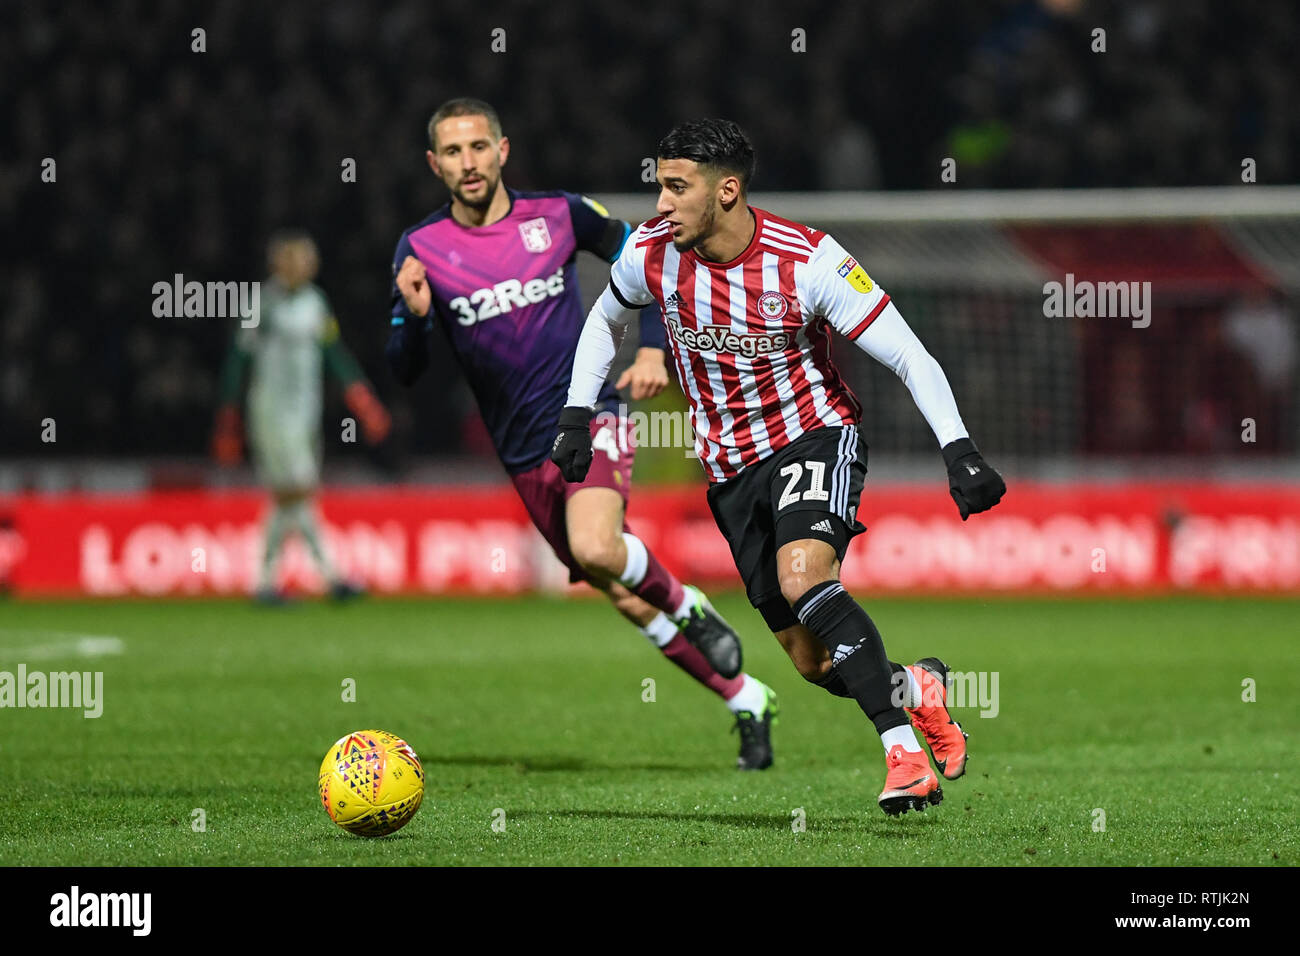 13th February 2019, Griffin Park, London, England; Sky Bet Championship, Brentford vs Aston Villa ; Saïd Benrahma (21) of Brentford makes a run with the ball   Credit: Phil Westlake/News Images,  English Football League images are subject to DataCo Licence Stock Photo